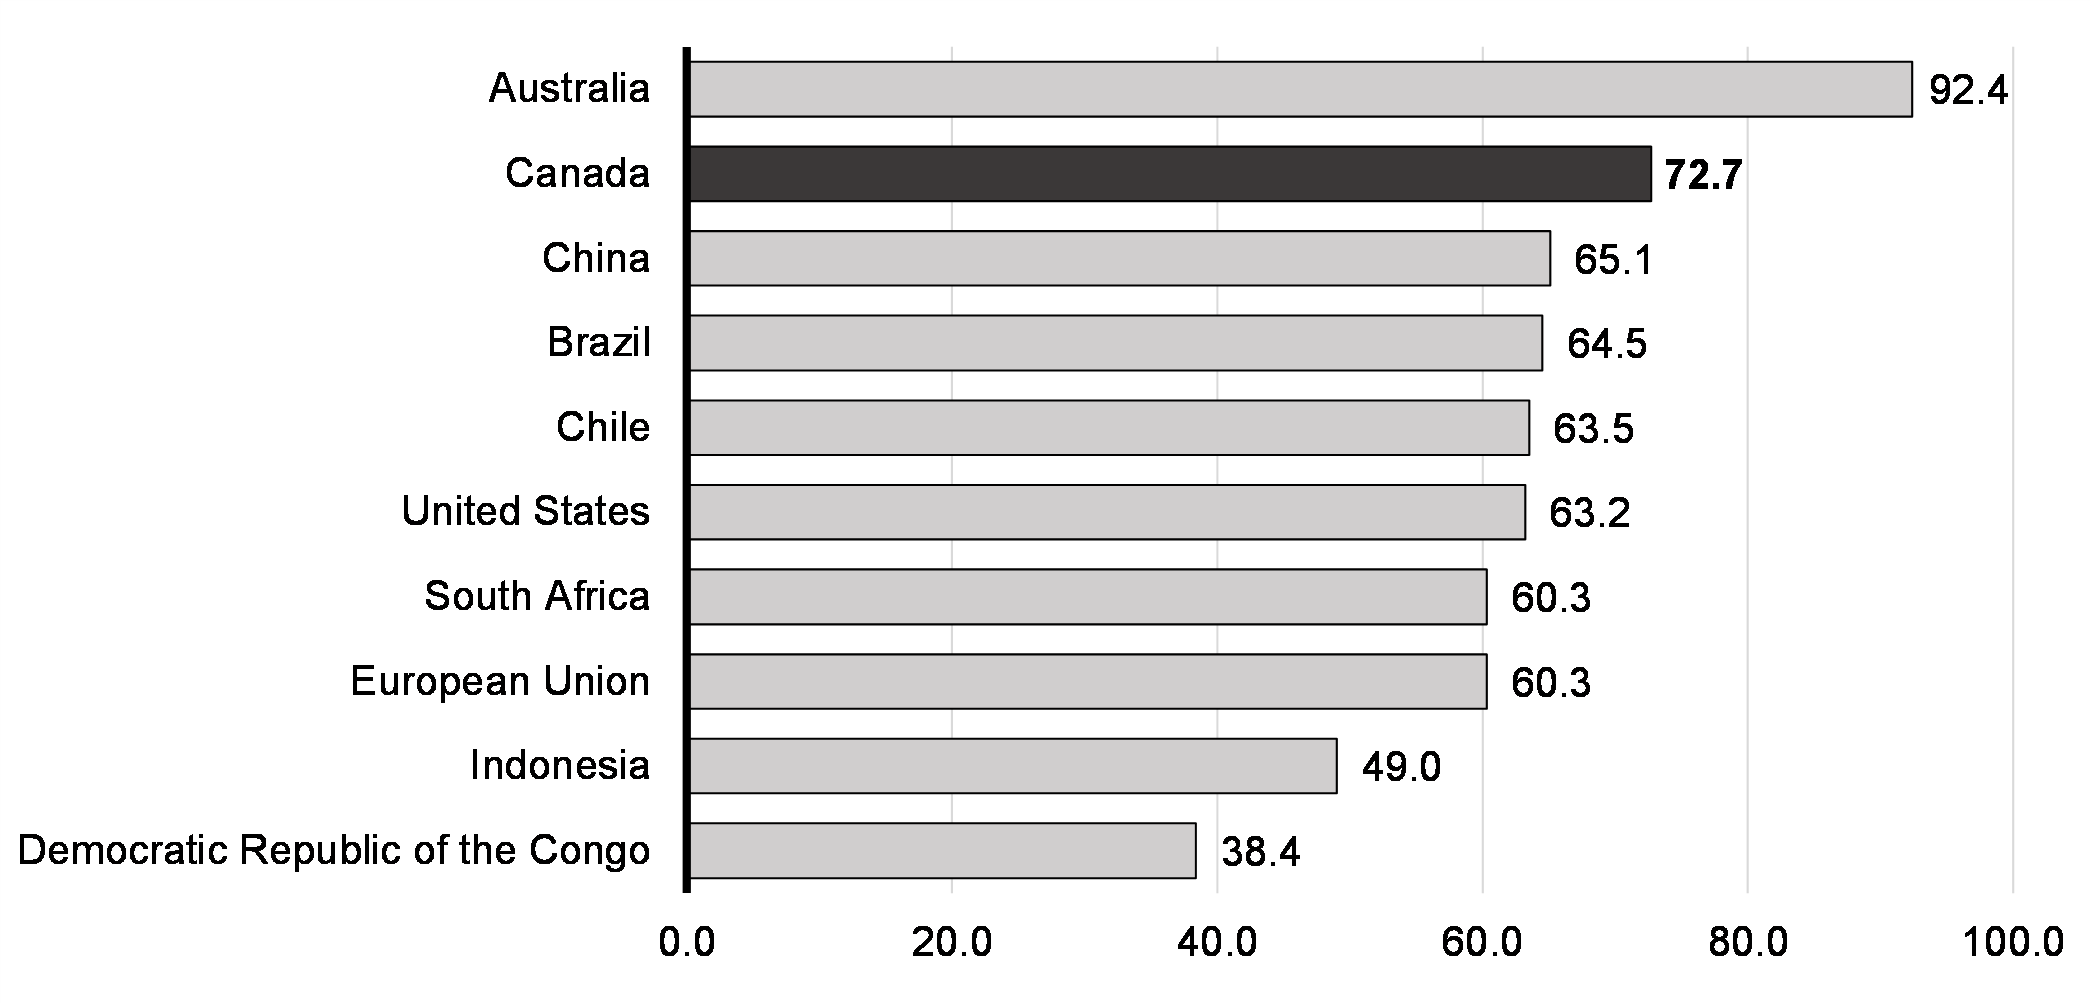 Chart 3.4: Canada is Globally Competitive in Critical Minerals and Metals Production